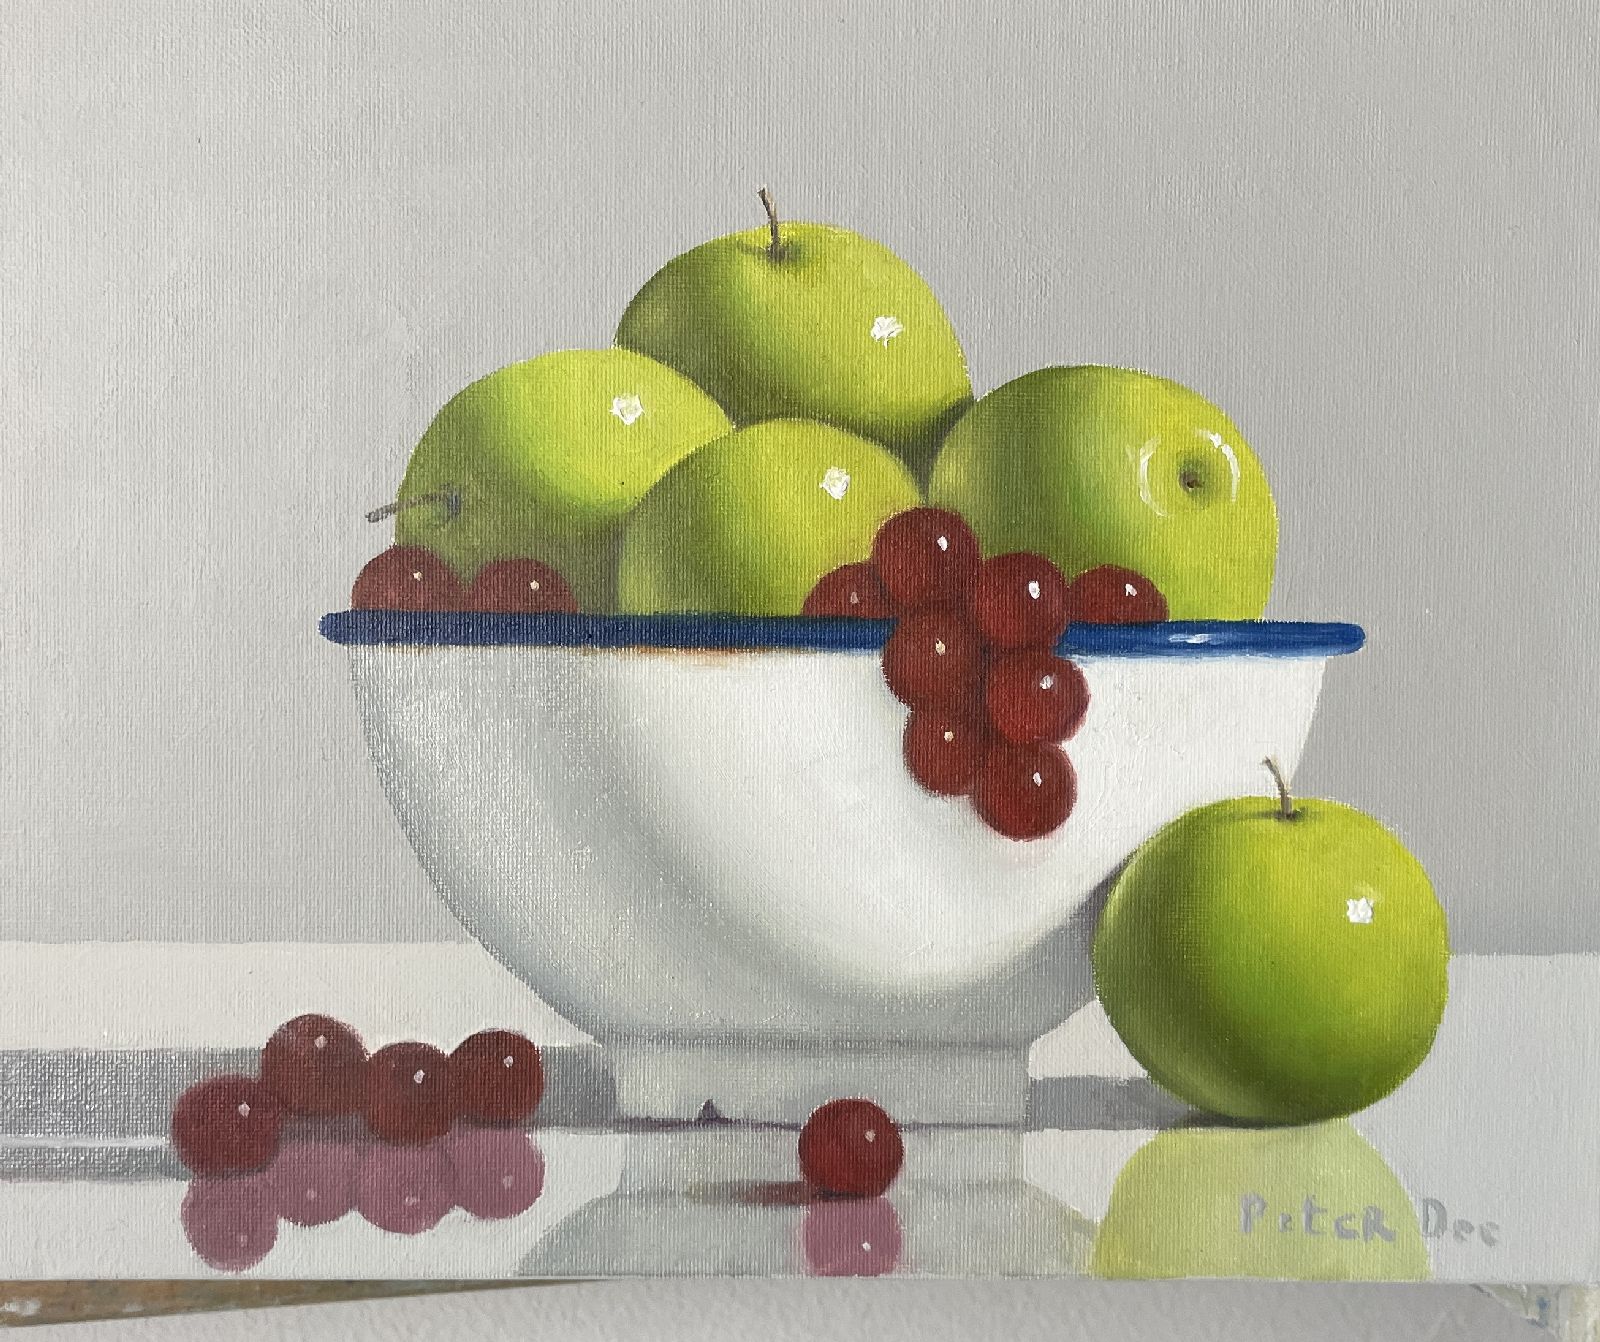 Peter Dee - Bowl of apples and grapes